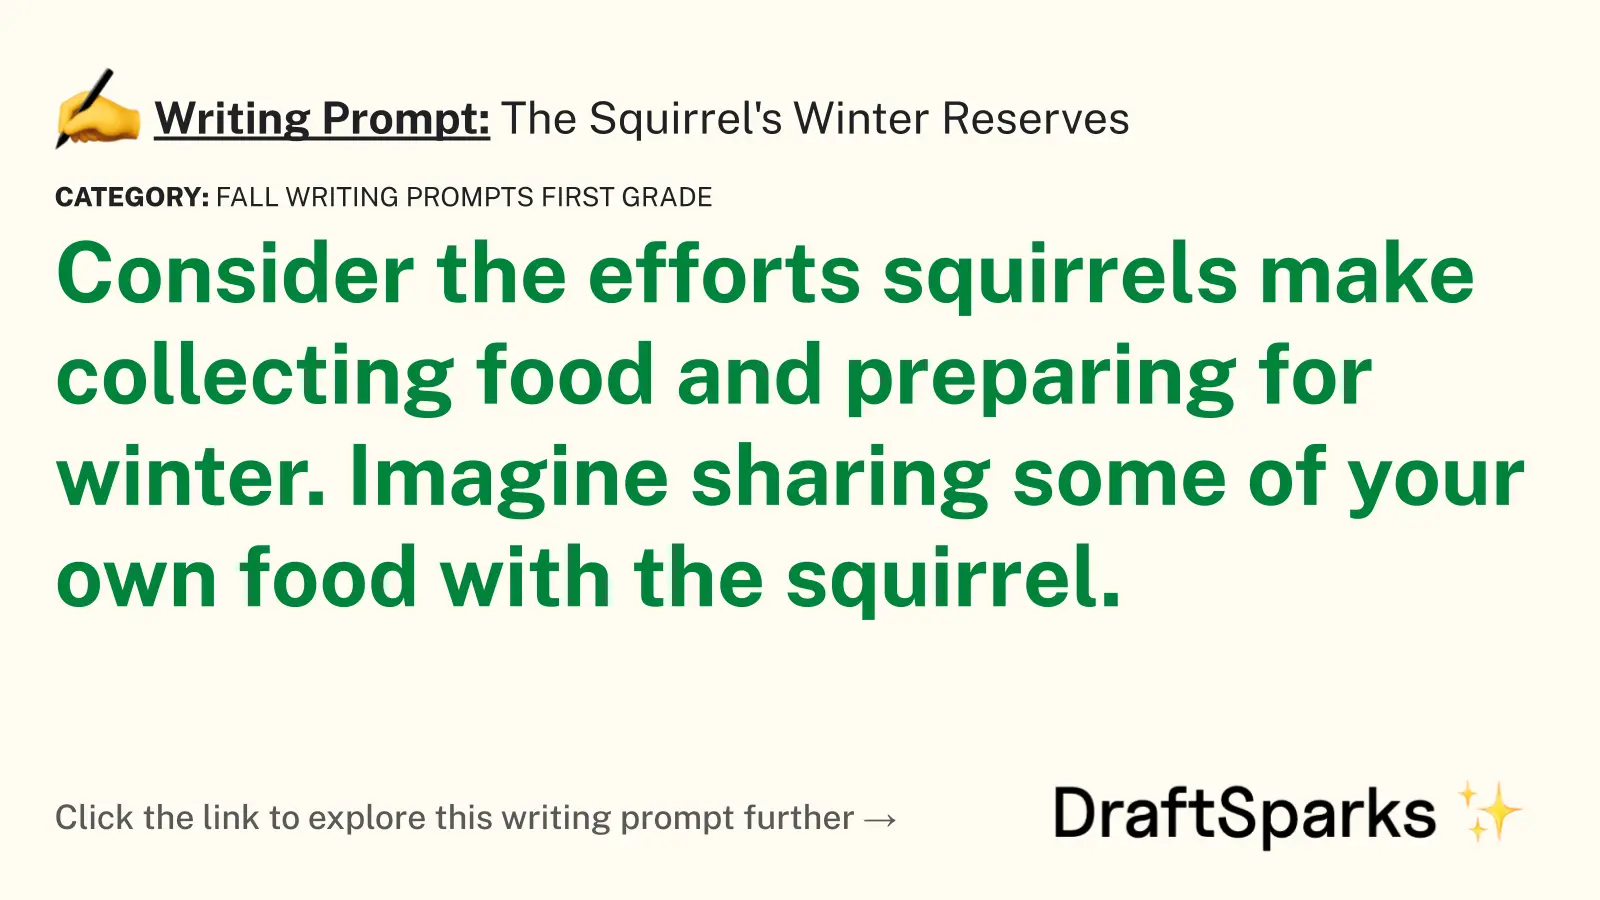 The Squirrel’s Winter Reserves